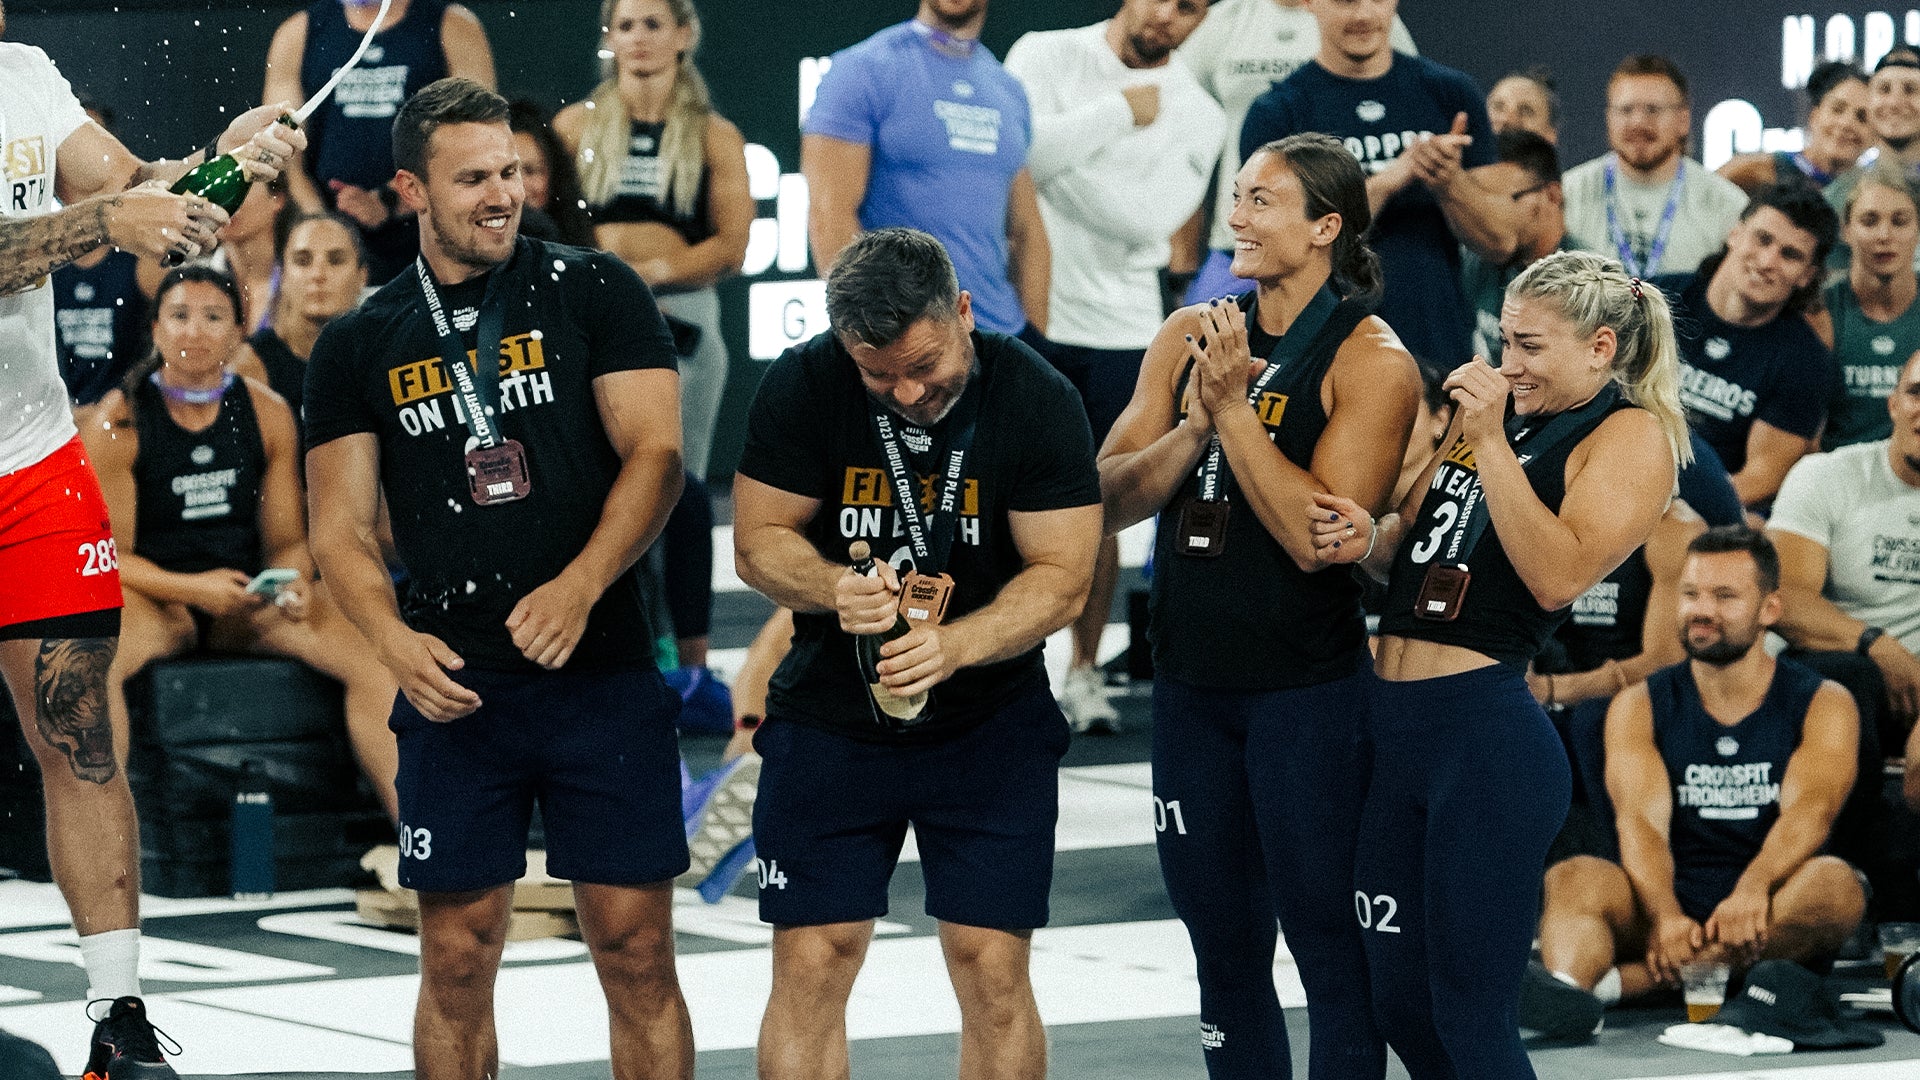 2023 Crossfit Games Final leaderboard, Picsil athlete results, disput